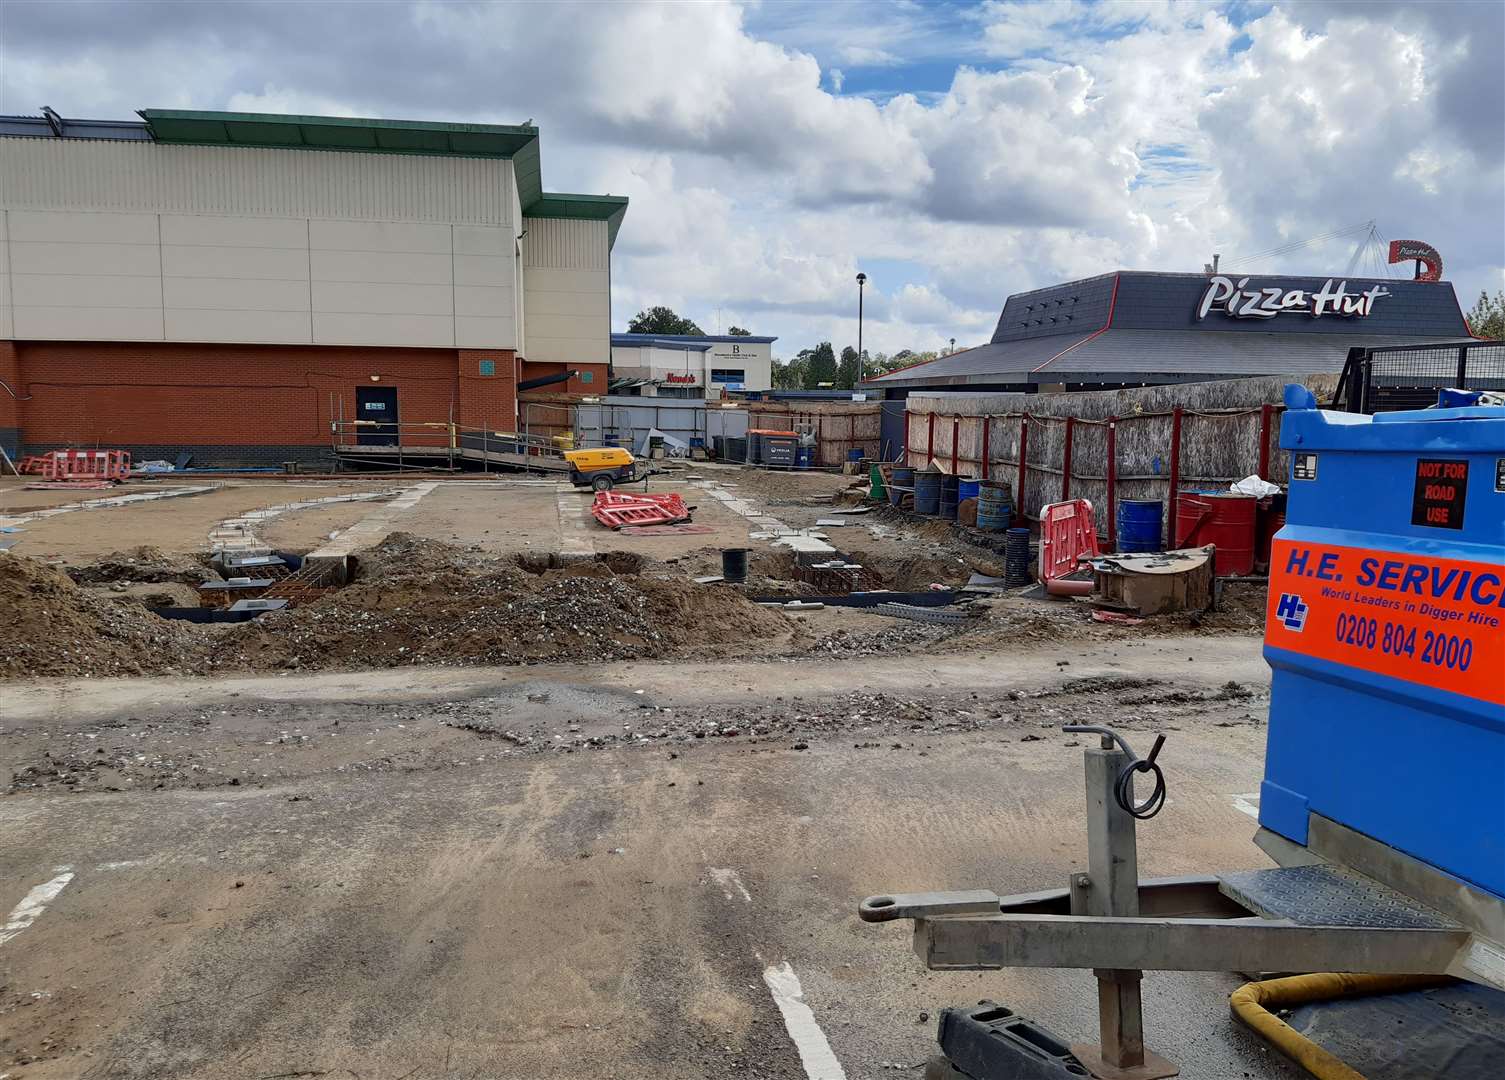 Work is continuing on the Ashford Cineworld's 4DX and IMAX extension